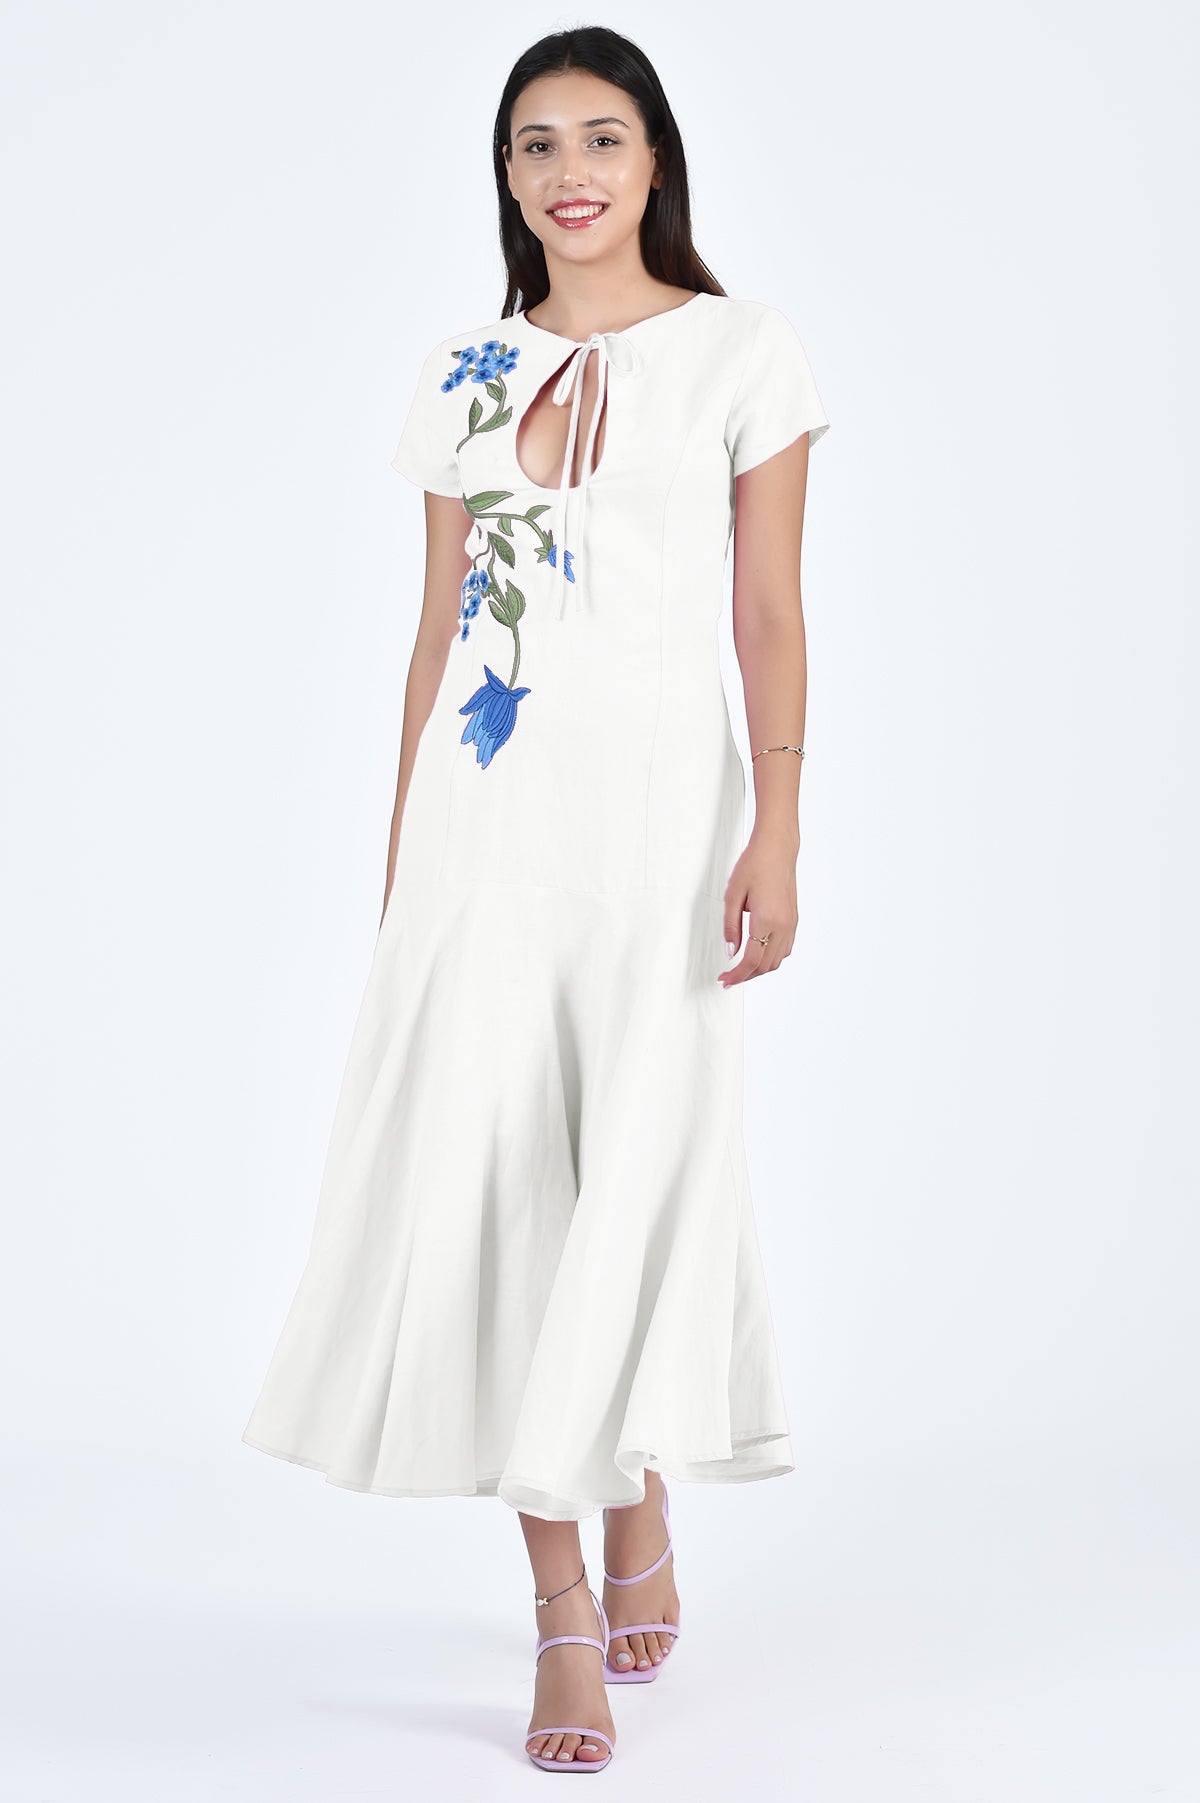 Barbara Midi-Dress in Ivory with Blue Floral Embroidery by Fanm Mon (Wombman Collection)